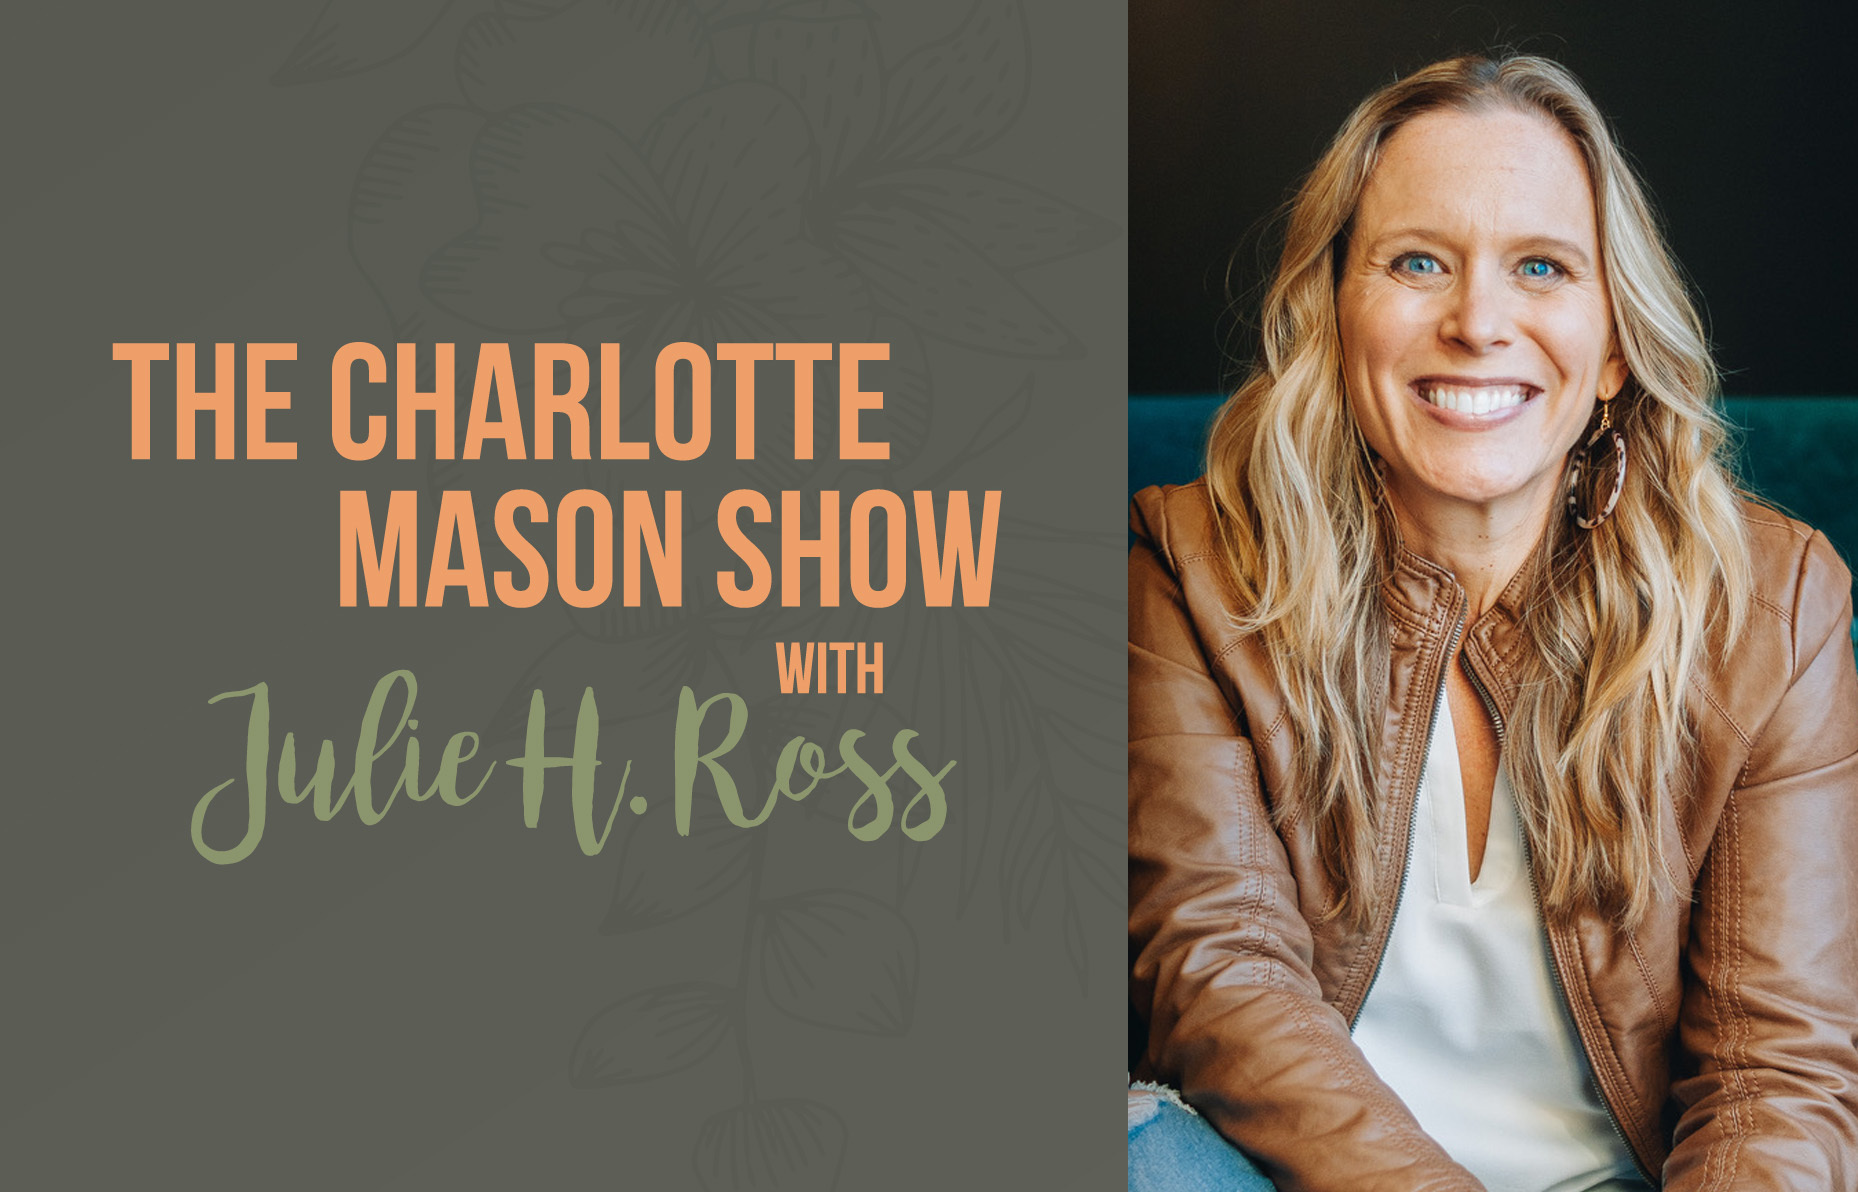 CM 3 Episode #17 Adding Beauty to Your Days with Physical Education with Julie H. Ross and Erin Underwood